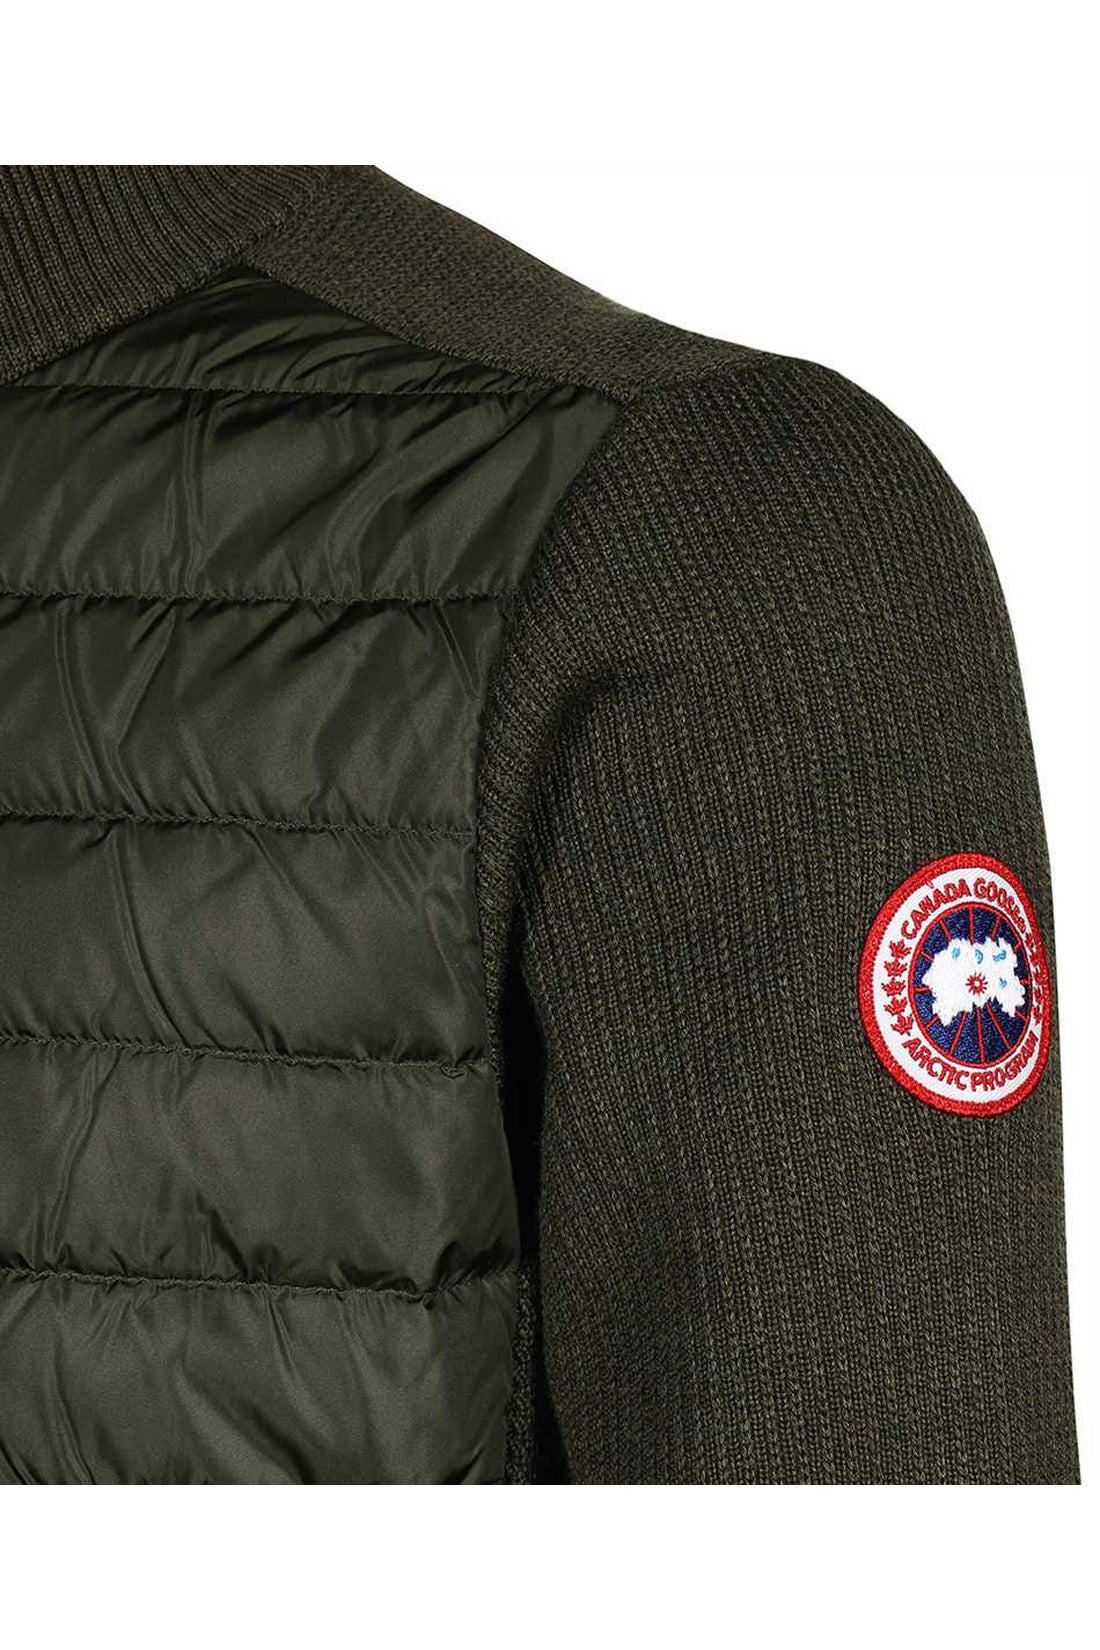 Canada Goose-OUTLET-SALE-Hybridge cardigan with padded front panel-ARCHIVIST